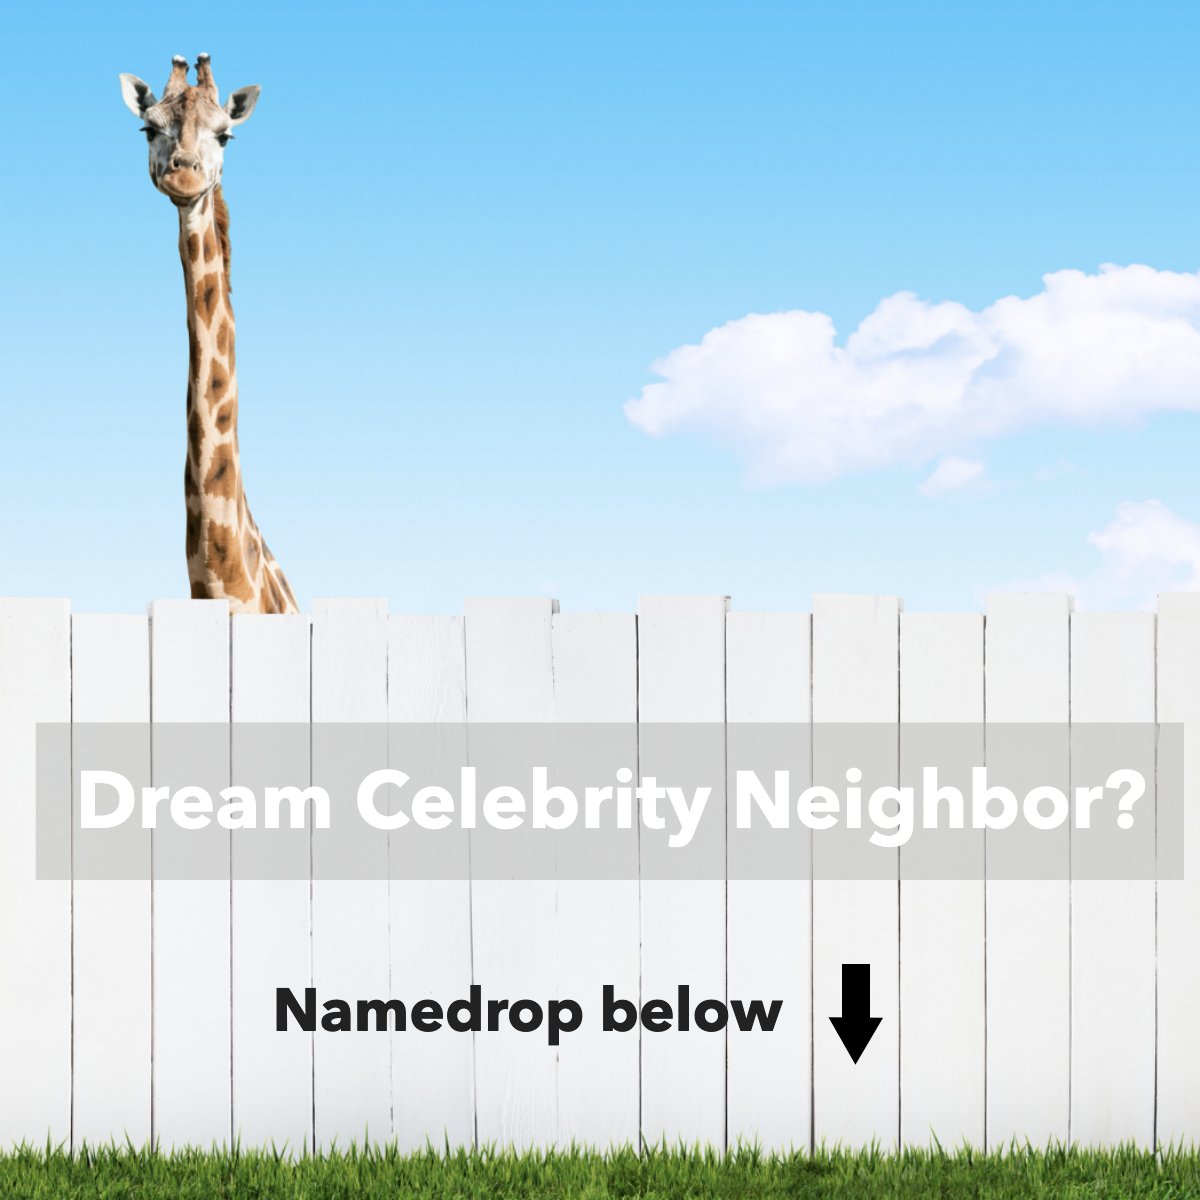 Imagine having a huge celebrity as a neighbor! ⭐️

Who would you like it to be? 😯

#question #neighbor #dreamhouse #celebrity
 #homeselling #evanrussell #realestate #northreading #homesearch #homebuying #firsttimehomebuying #realtor #realestateagent #homesforsale